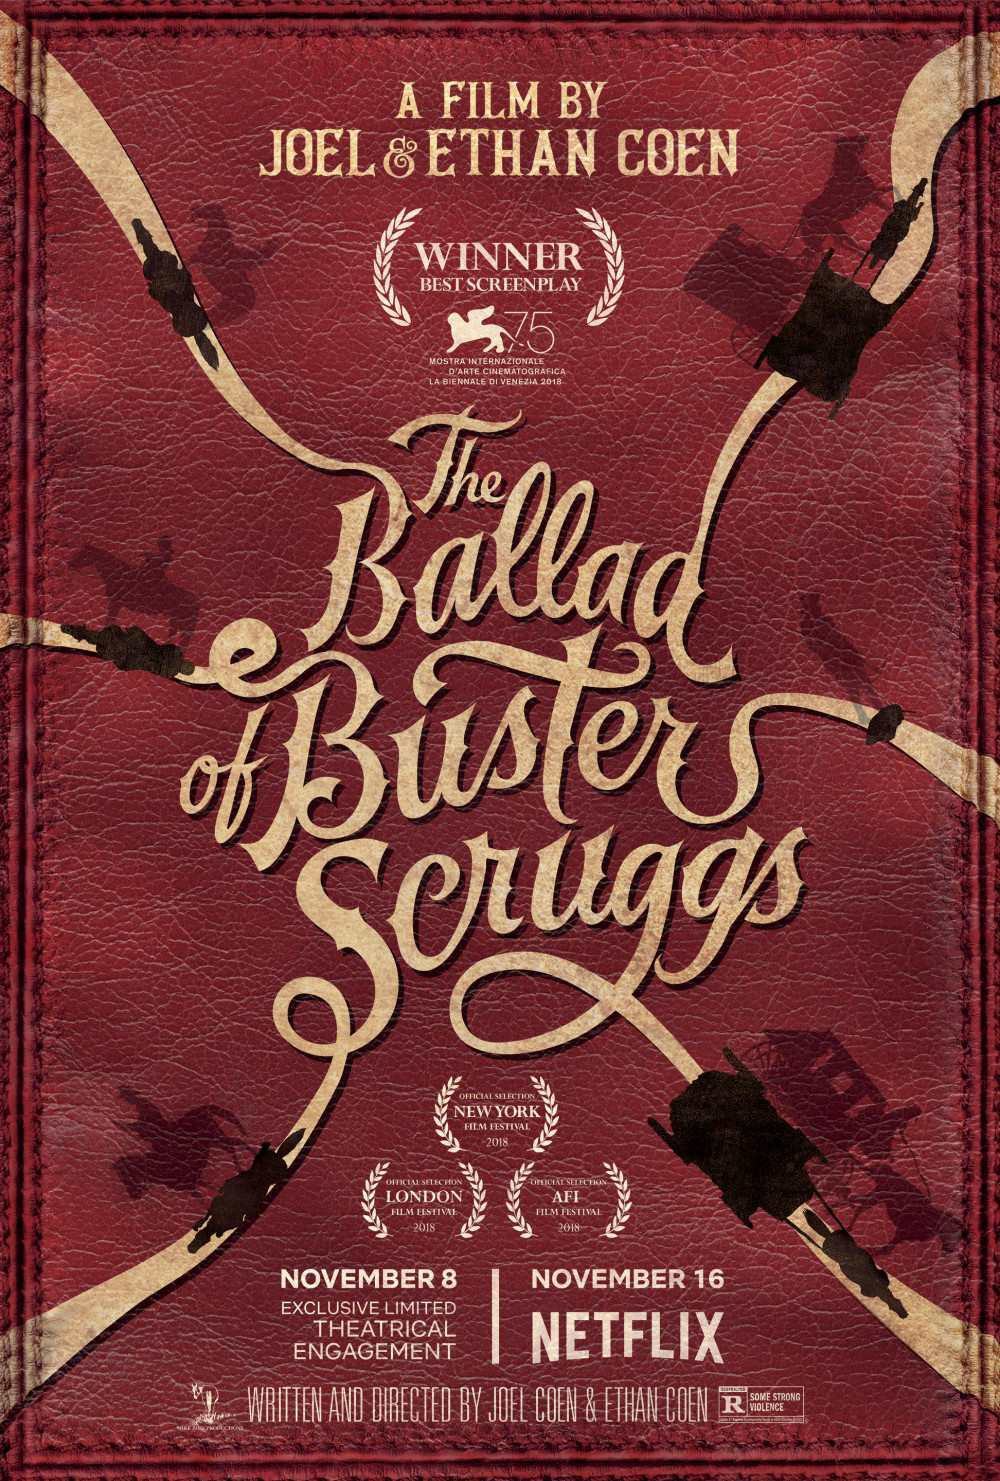 The Ballad of Buster Scruggs – “All Gold Canyon” (Netflix’te mevcut)